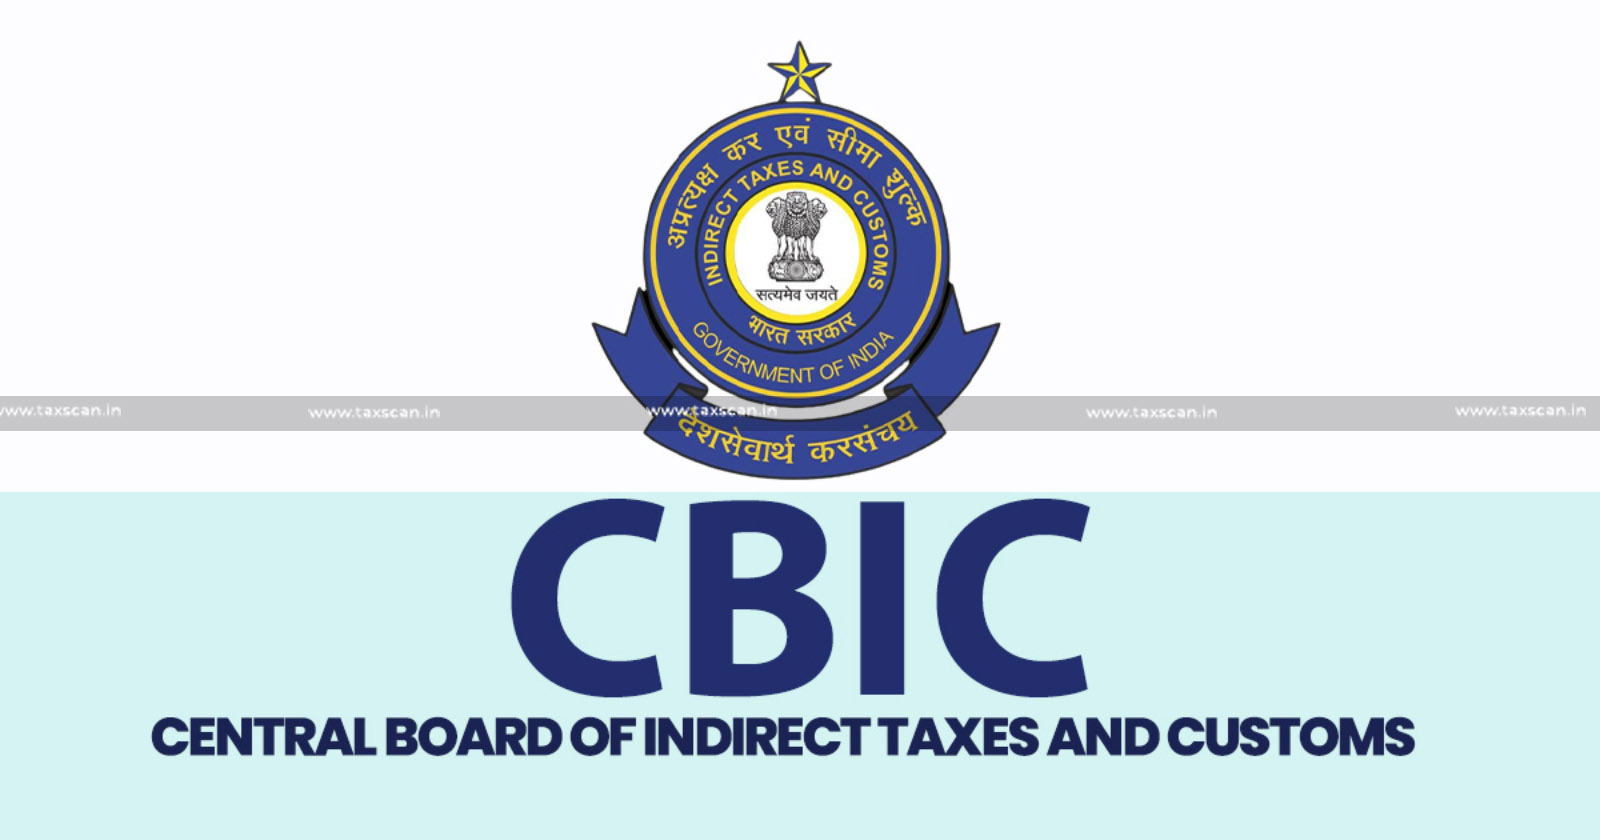 No Interest on Wrongly availed - IGST time period starting from availment and up to its - Reversal CBIC clarifies - TAXSCAN